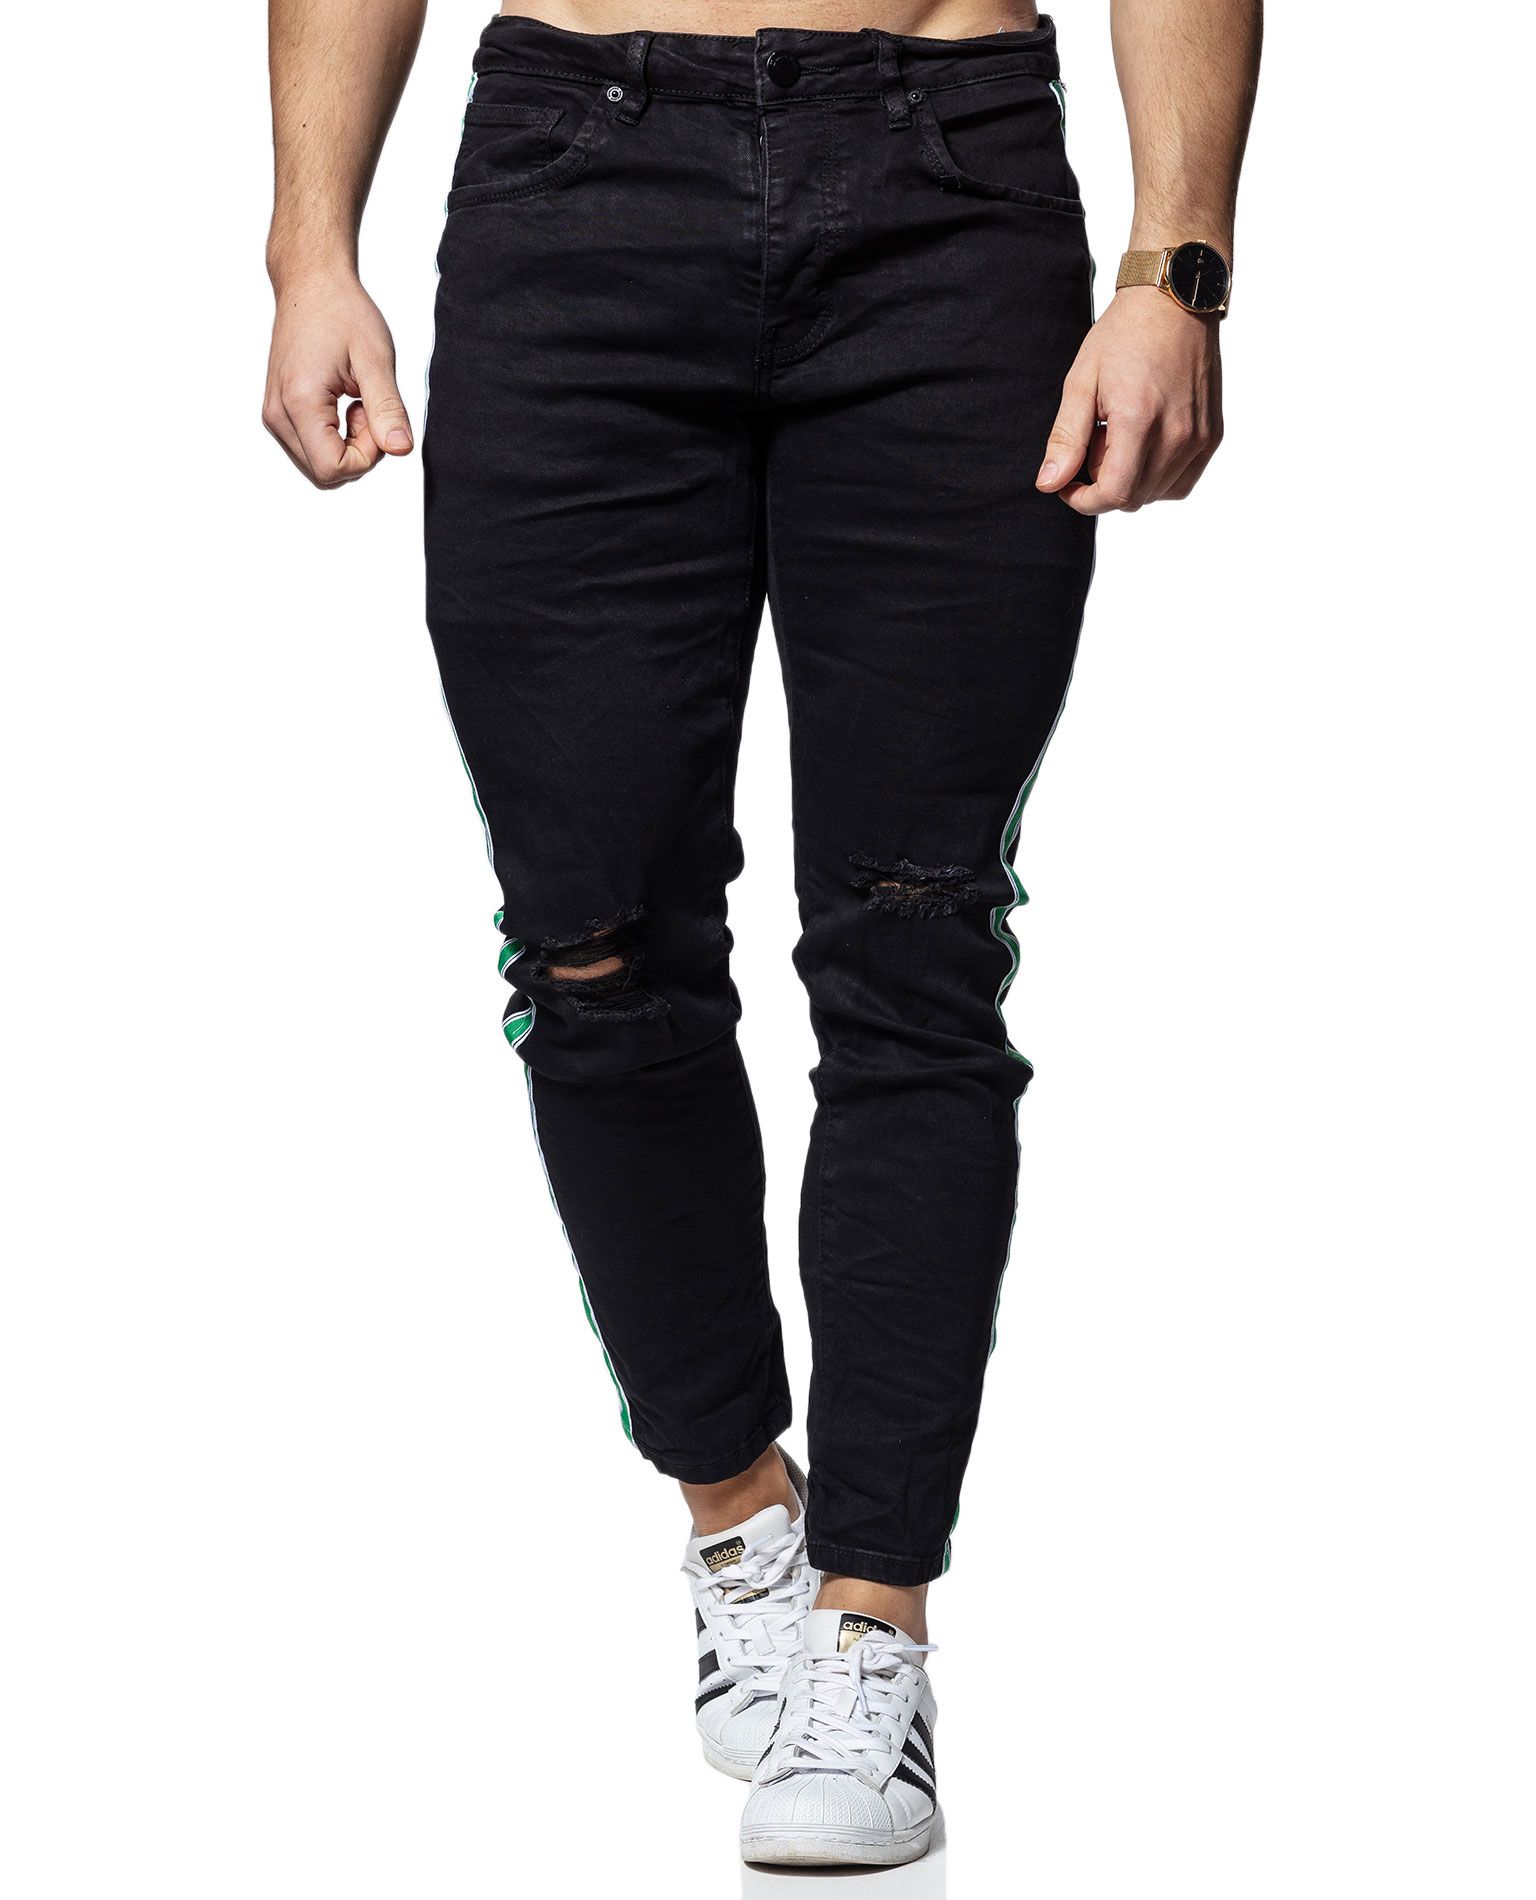 Regular Fit Ripped Mens Scratch Jeans, Black at Rs 470/piece in Mumbai |  ID: 2851895441233